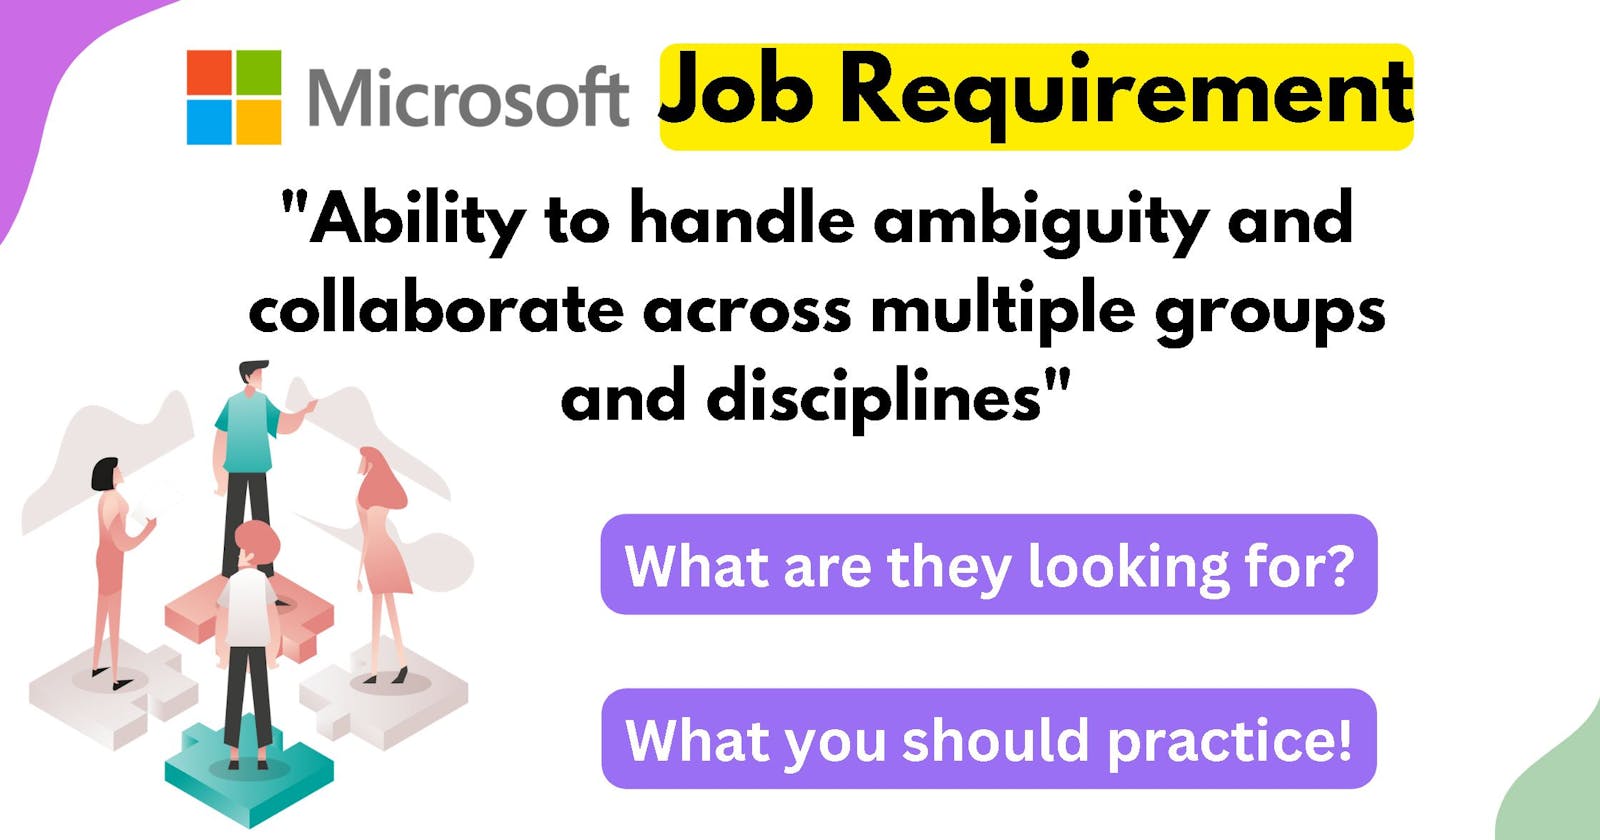 Microsoft Job requirement: "Ability to handle ambiguity and collaborate across multiple groups and disciplines"